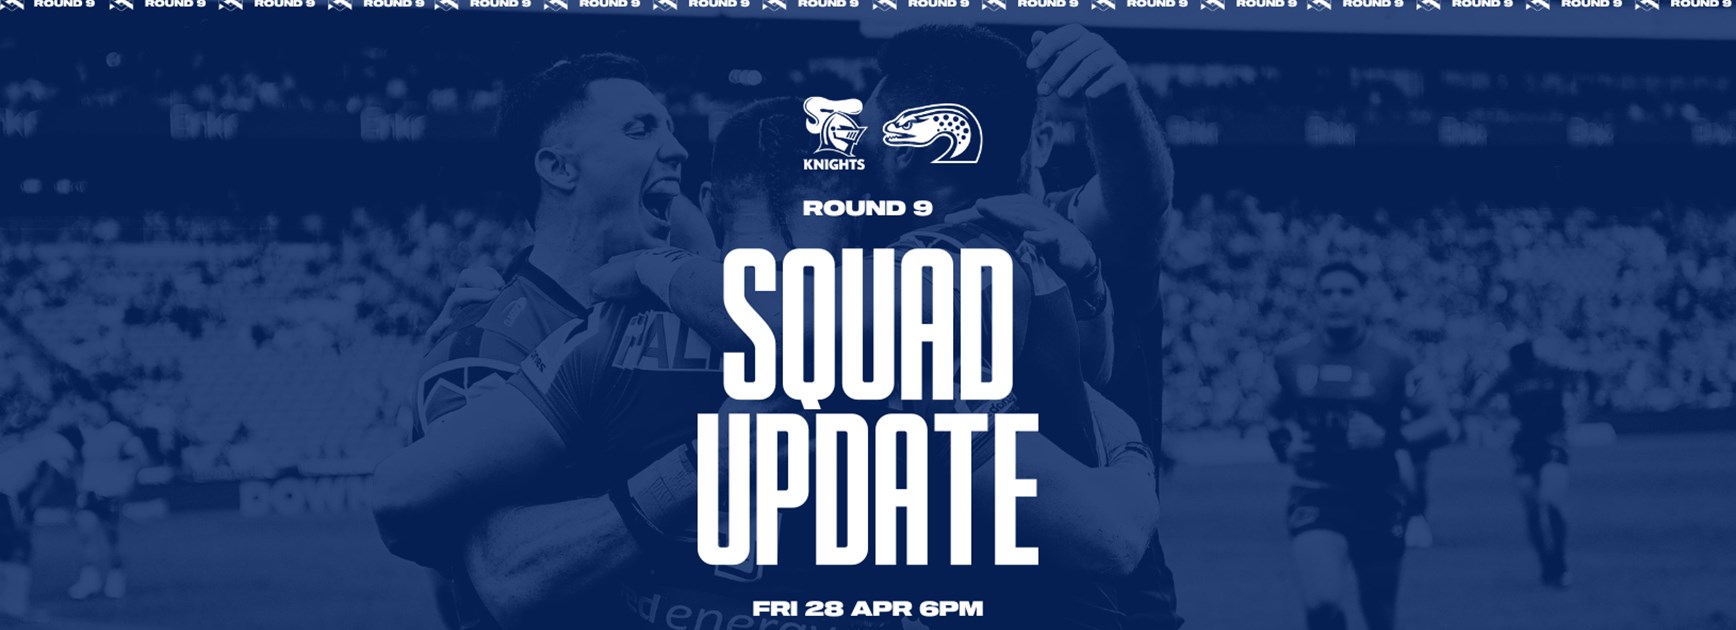 Squad Update: Team reduced ahead of Round 9